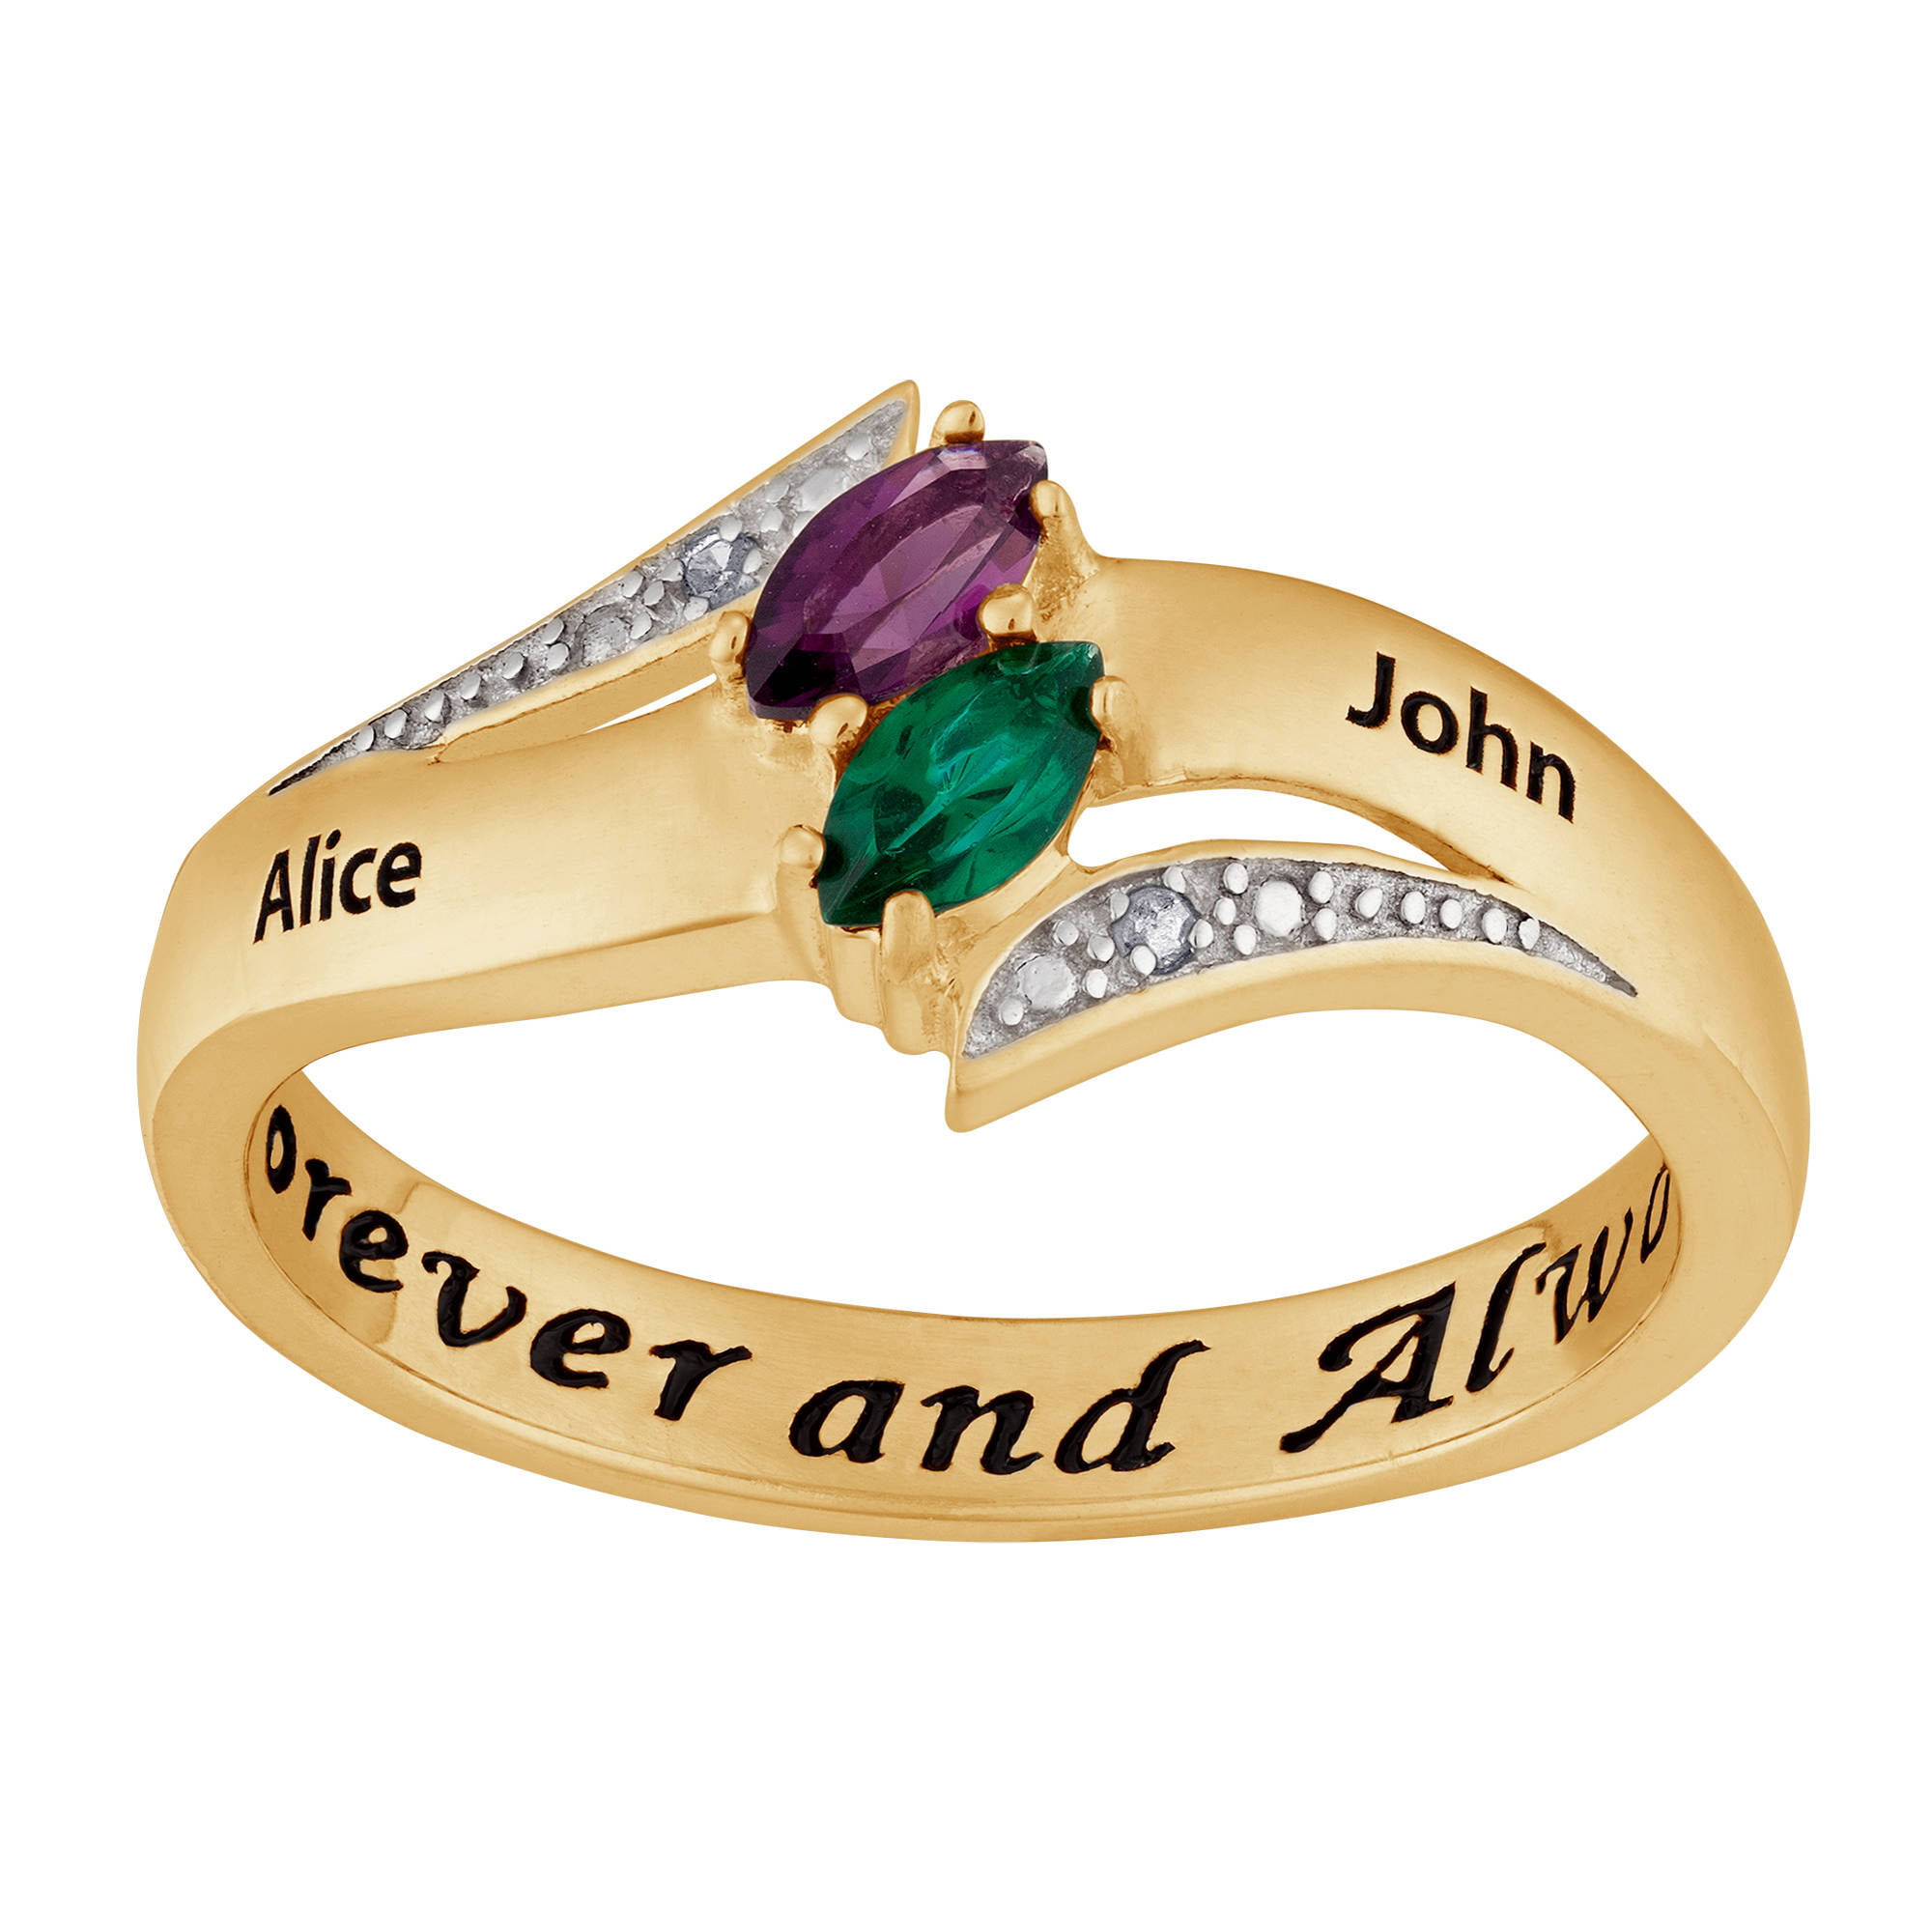 Personalized Personalized Couple's 10kt Gold Birthstone and Name Ring